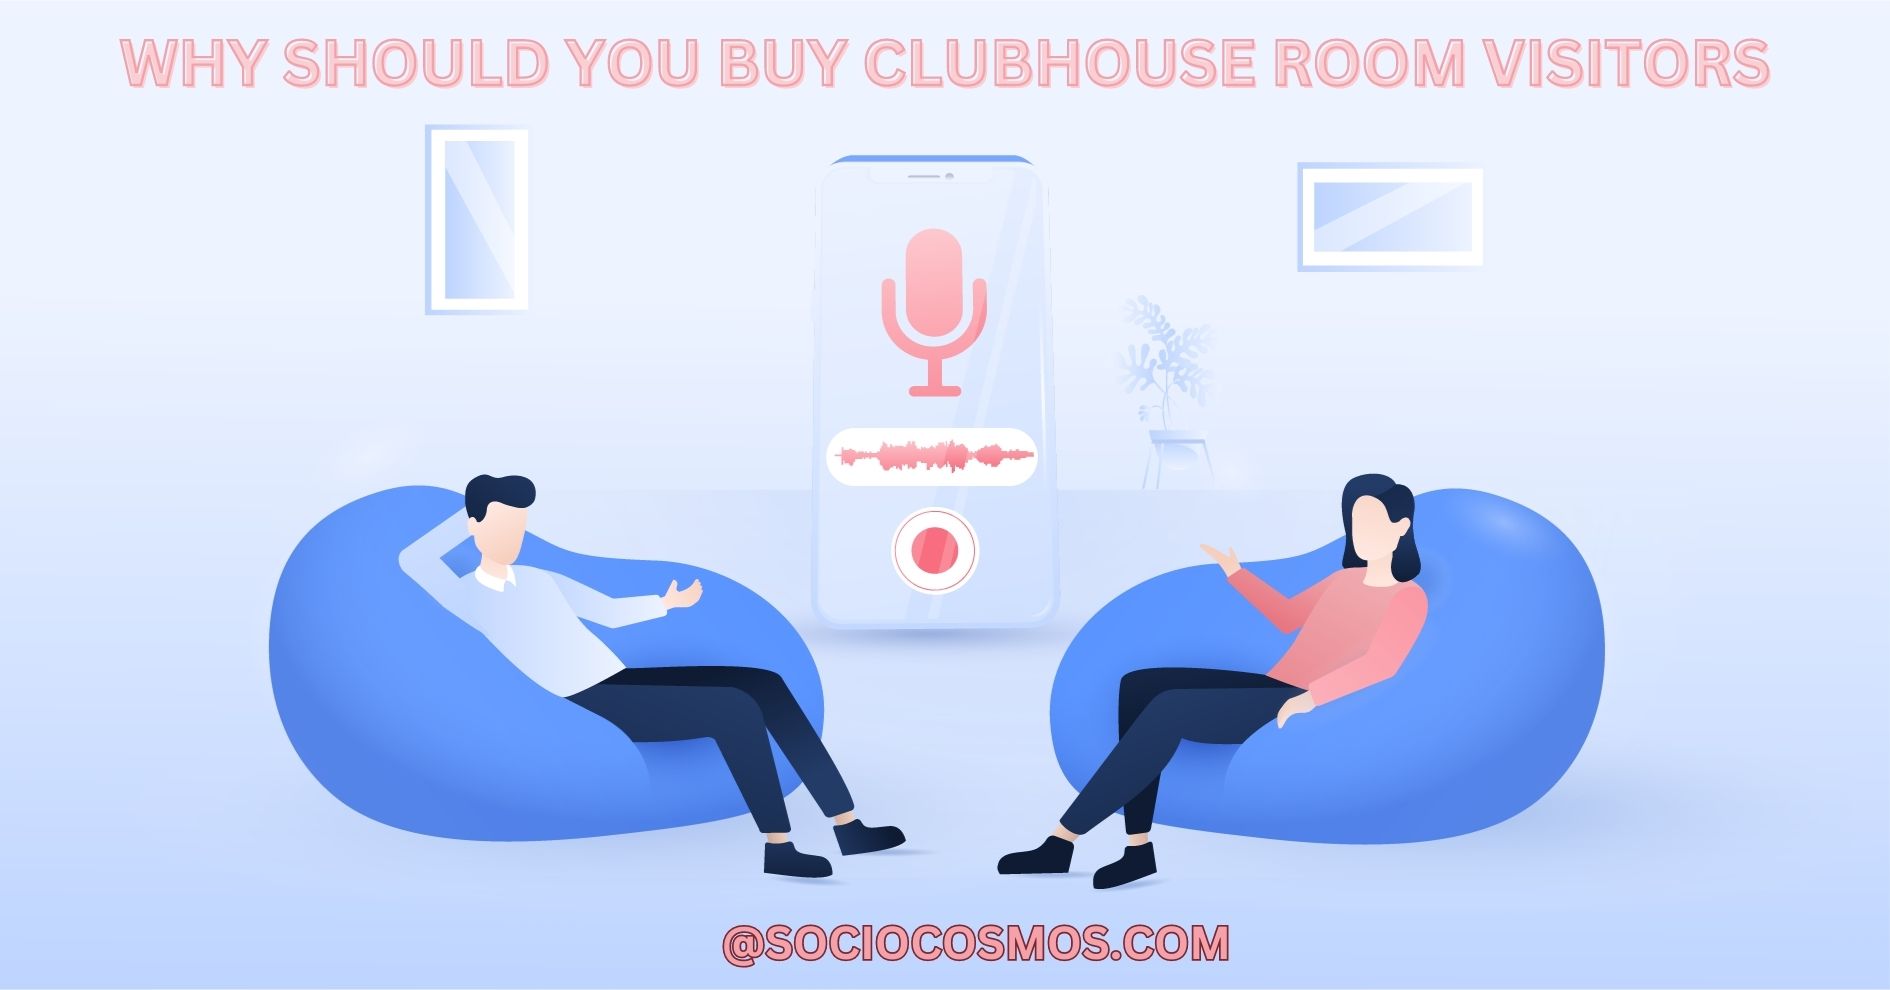 WHY SHOULD YOU BUY CLUBHOUSE ROOM VISITORS